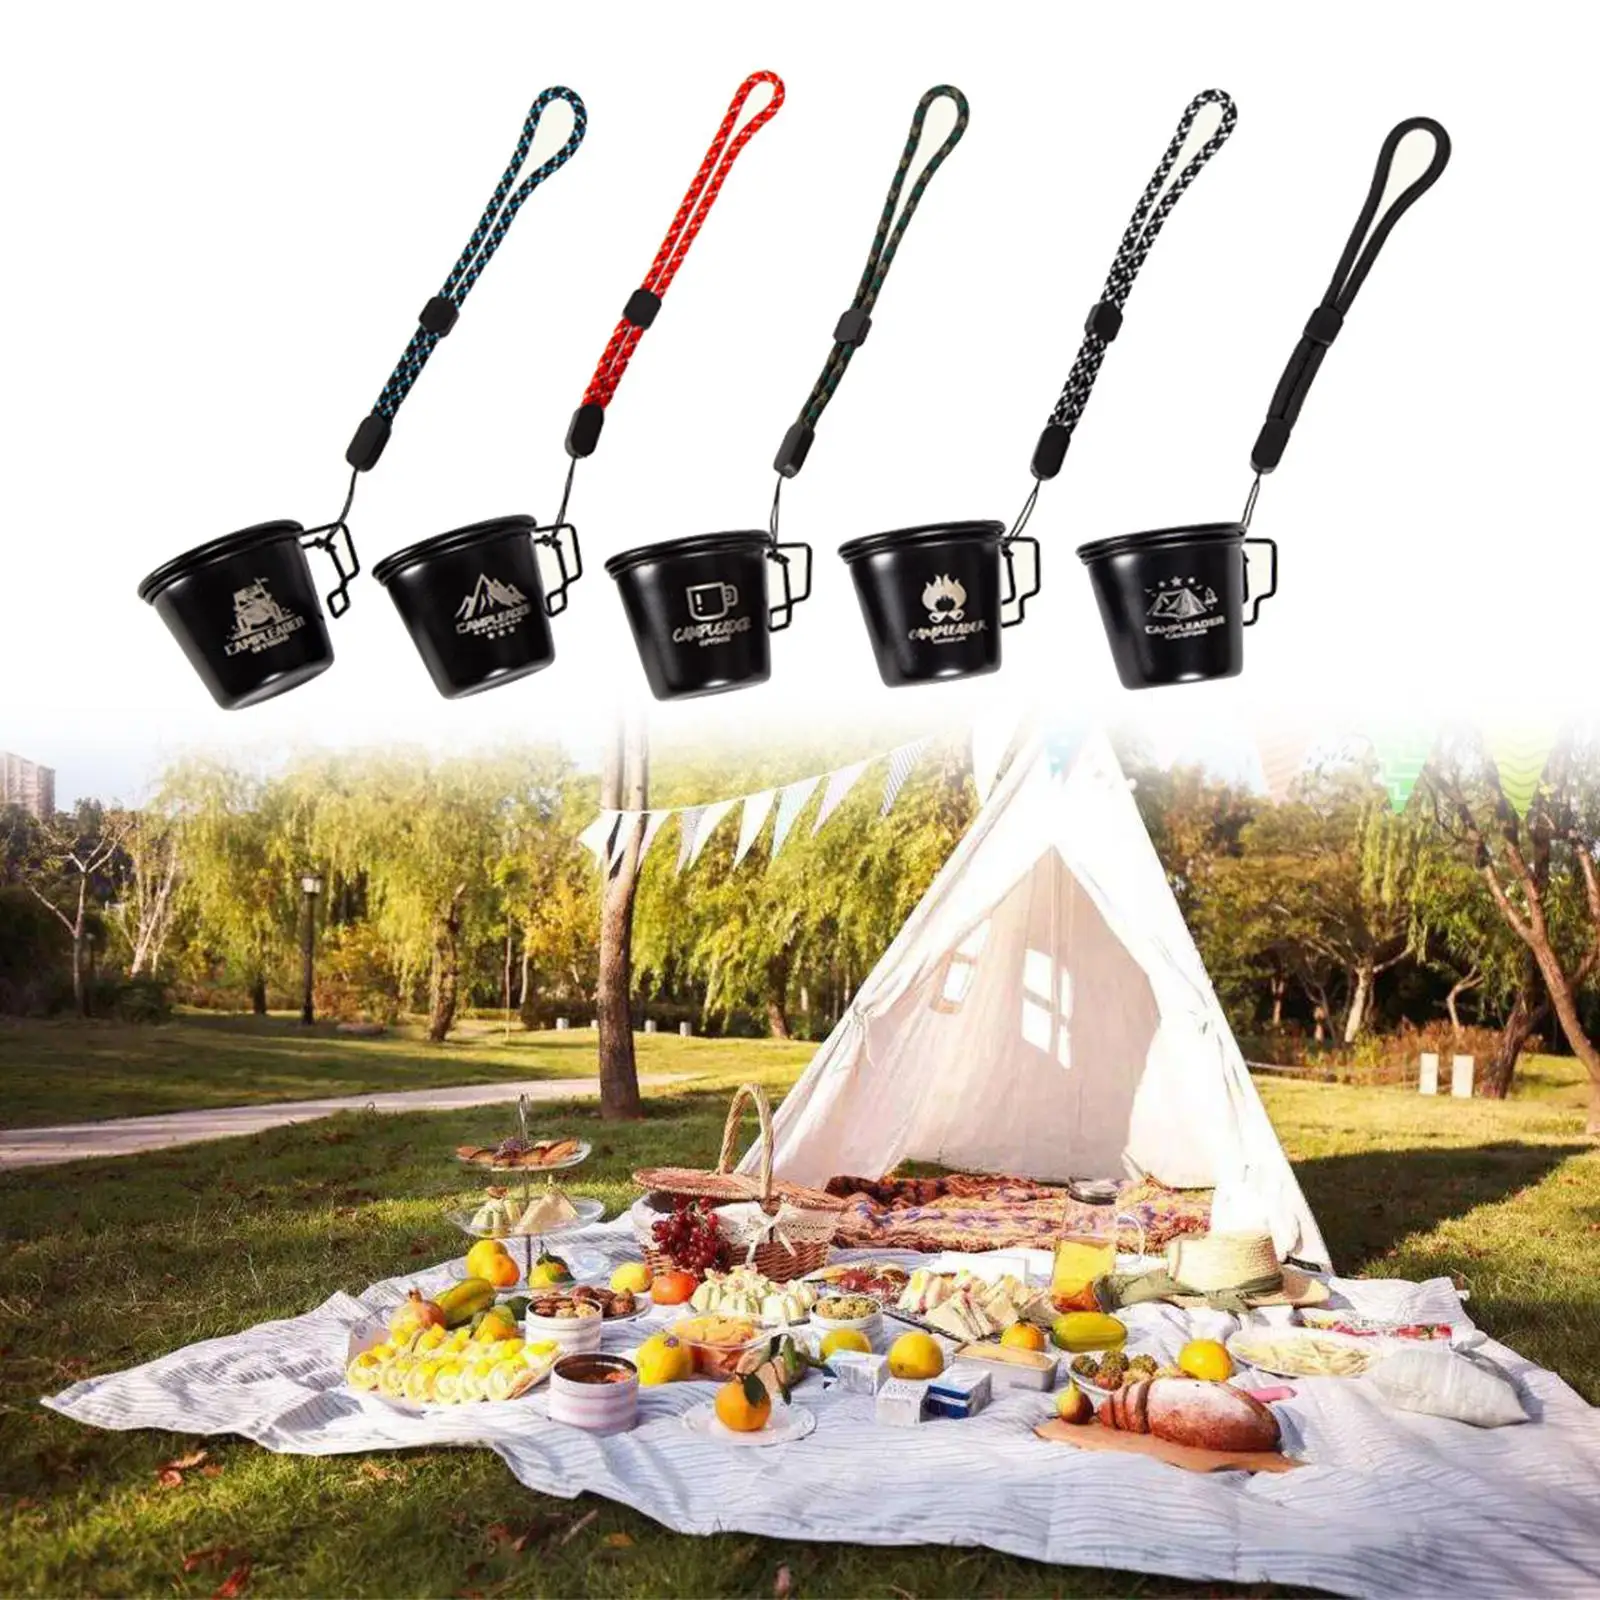 5 Pieces 304 Stainless Steel Milk Coffee Cups w/ Hanging Rope Handle Mugs for Camping Campfire BBQ Hiking